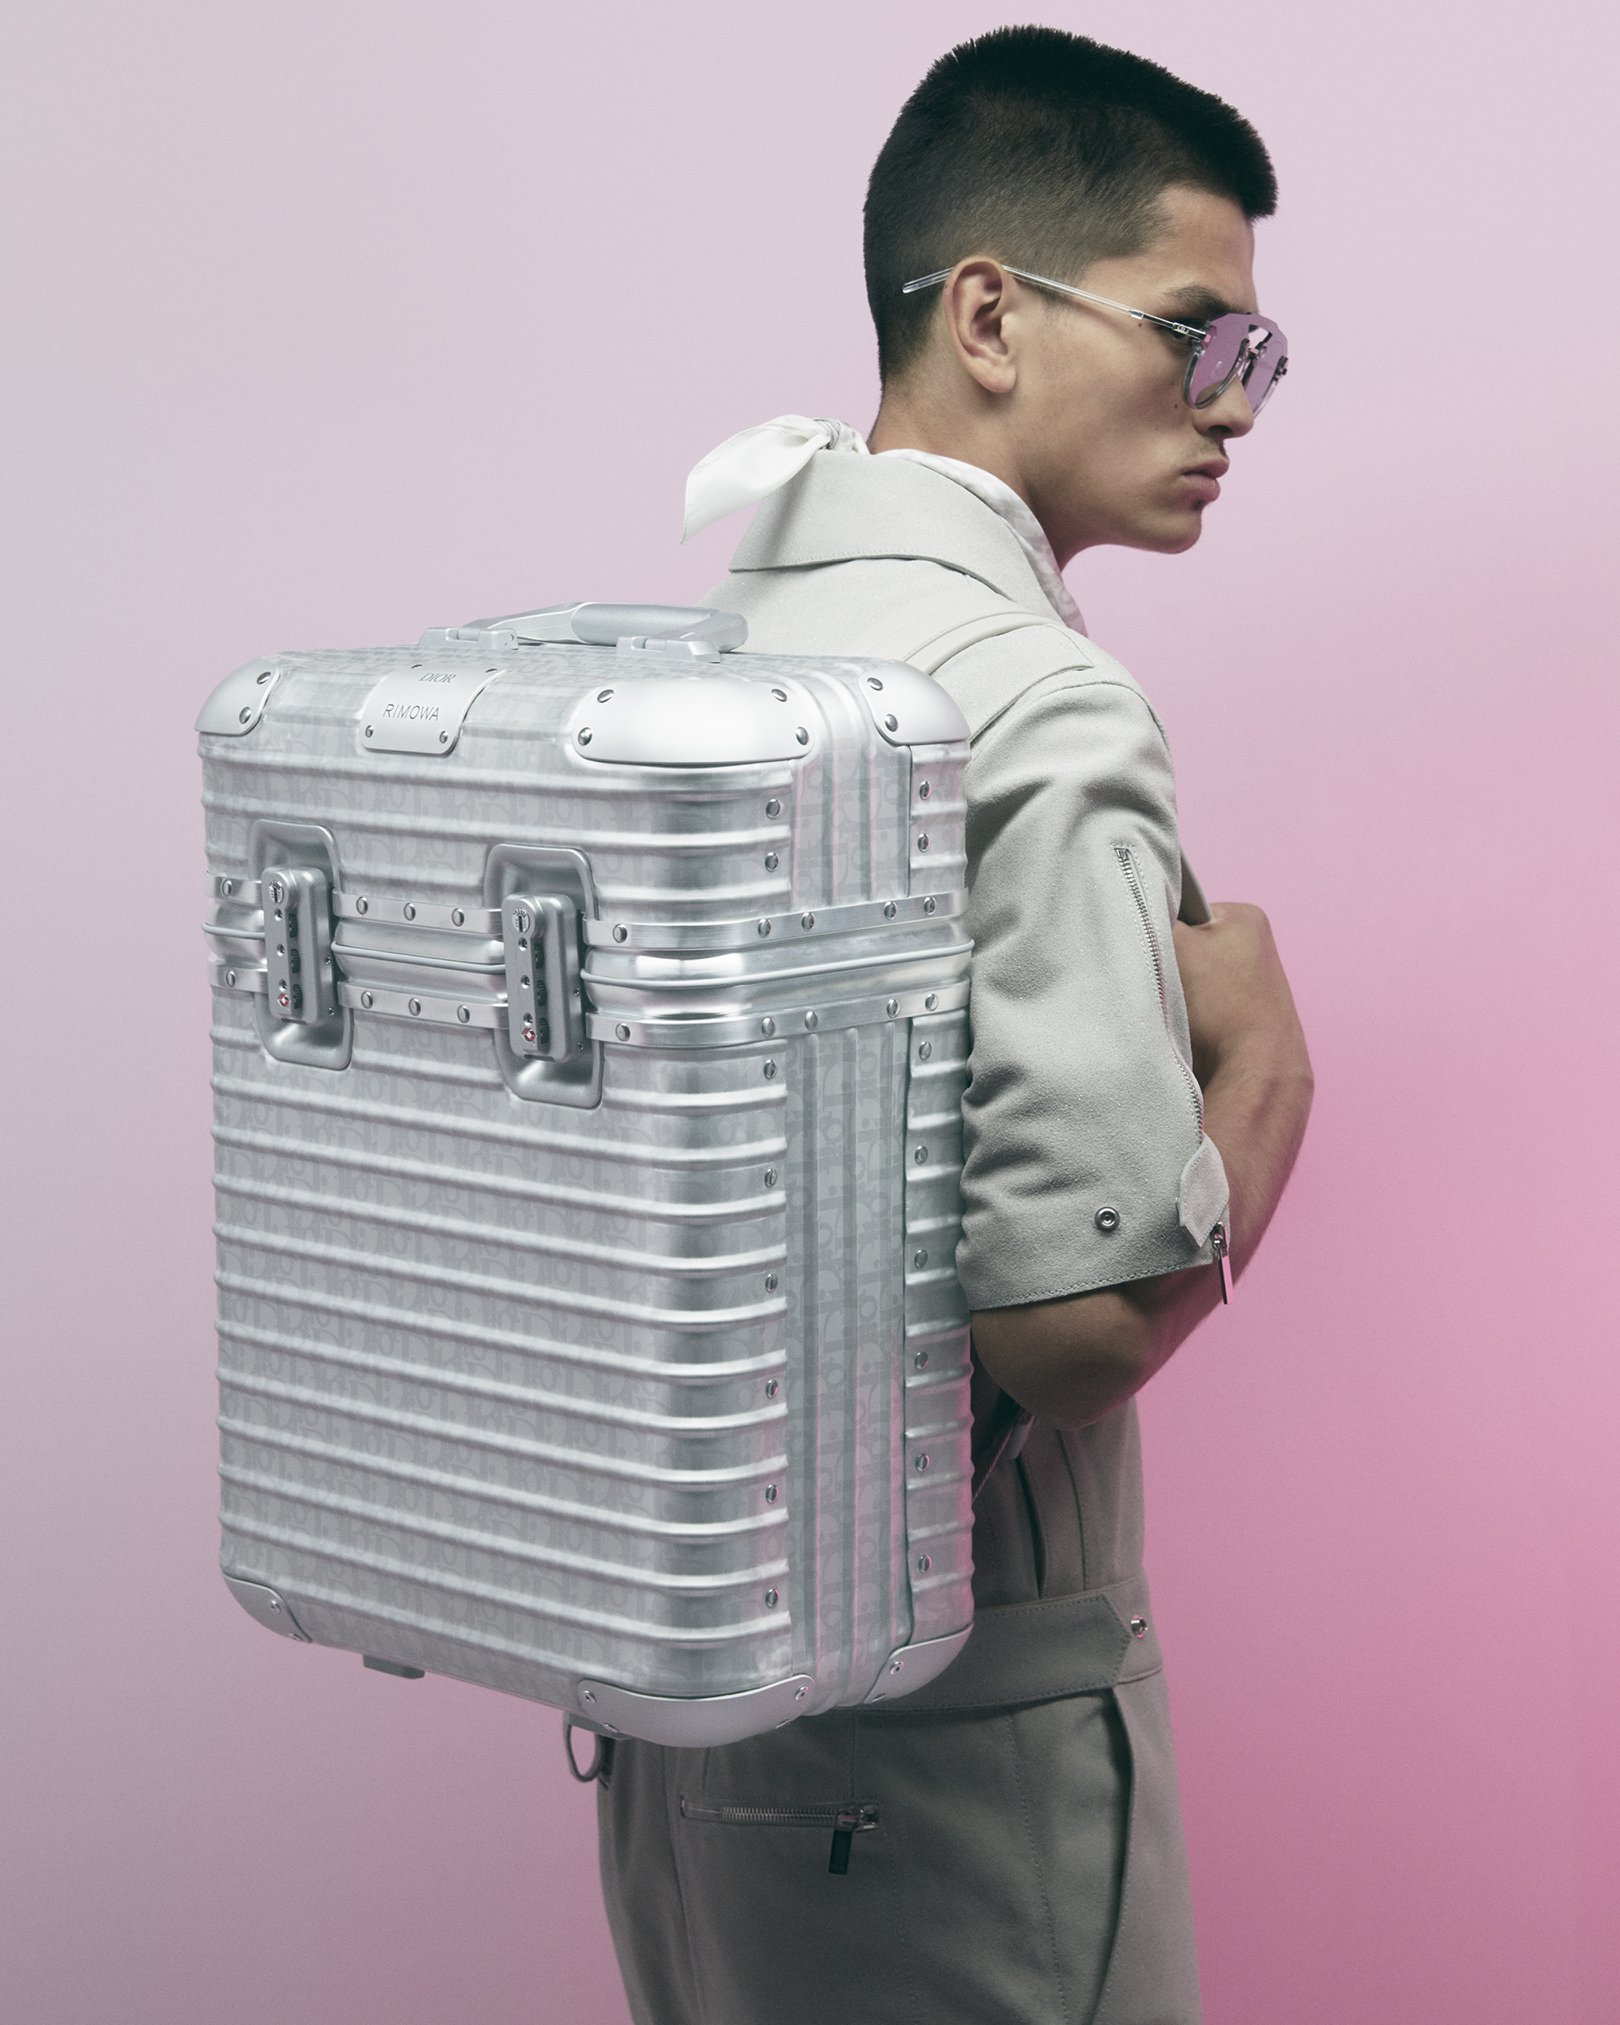 The Dior Summer 2020 men's show by Kim Jones, the Creative Director of Dior men's collections, unveiled a unique capsule collection done in collaboration with the luxury luggage brand Rimowa, featuring special-edition products such as a backpack or a champagne case. This collection features the 'Dior Oblique' signature inscribed directly onto the German brand's iconic aluminum skin. Discover more about the collection on.dior.com/summer20!